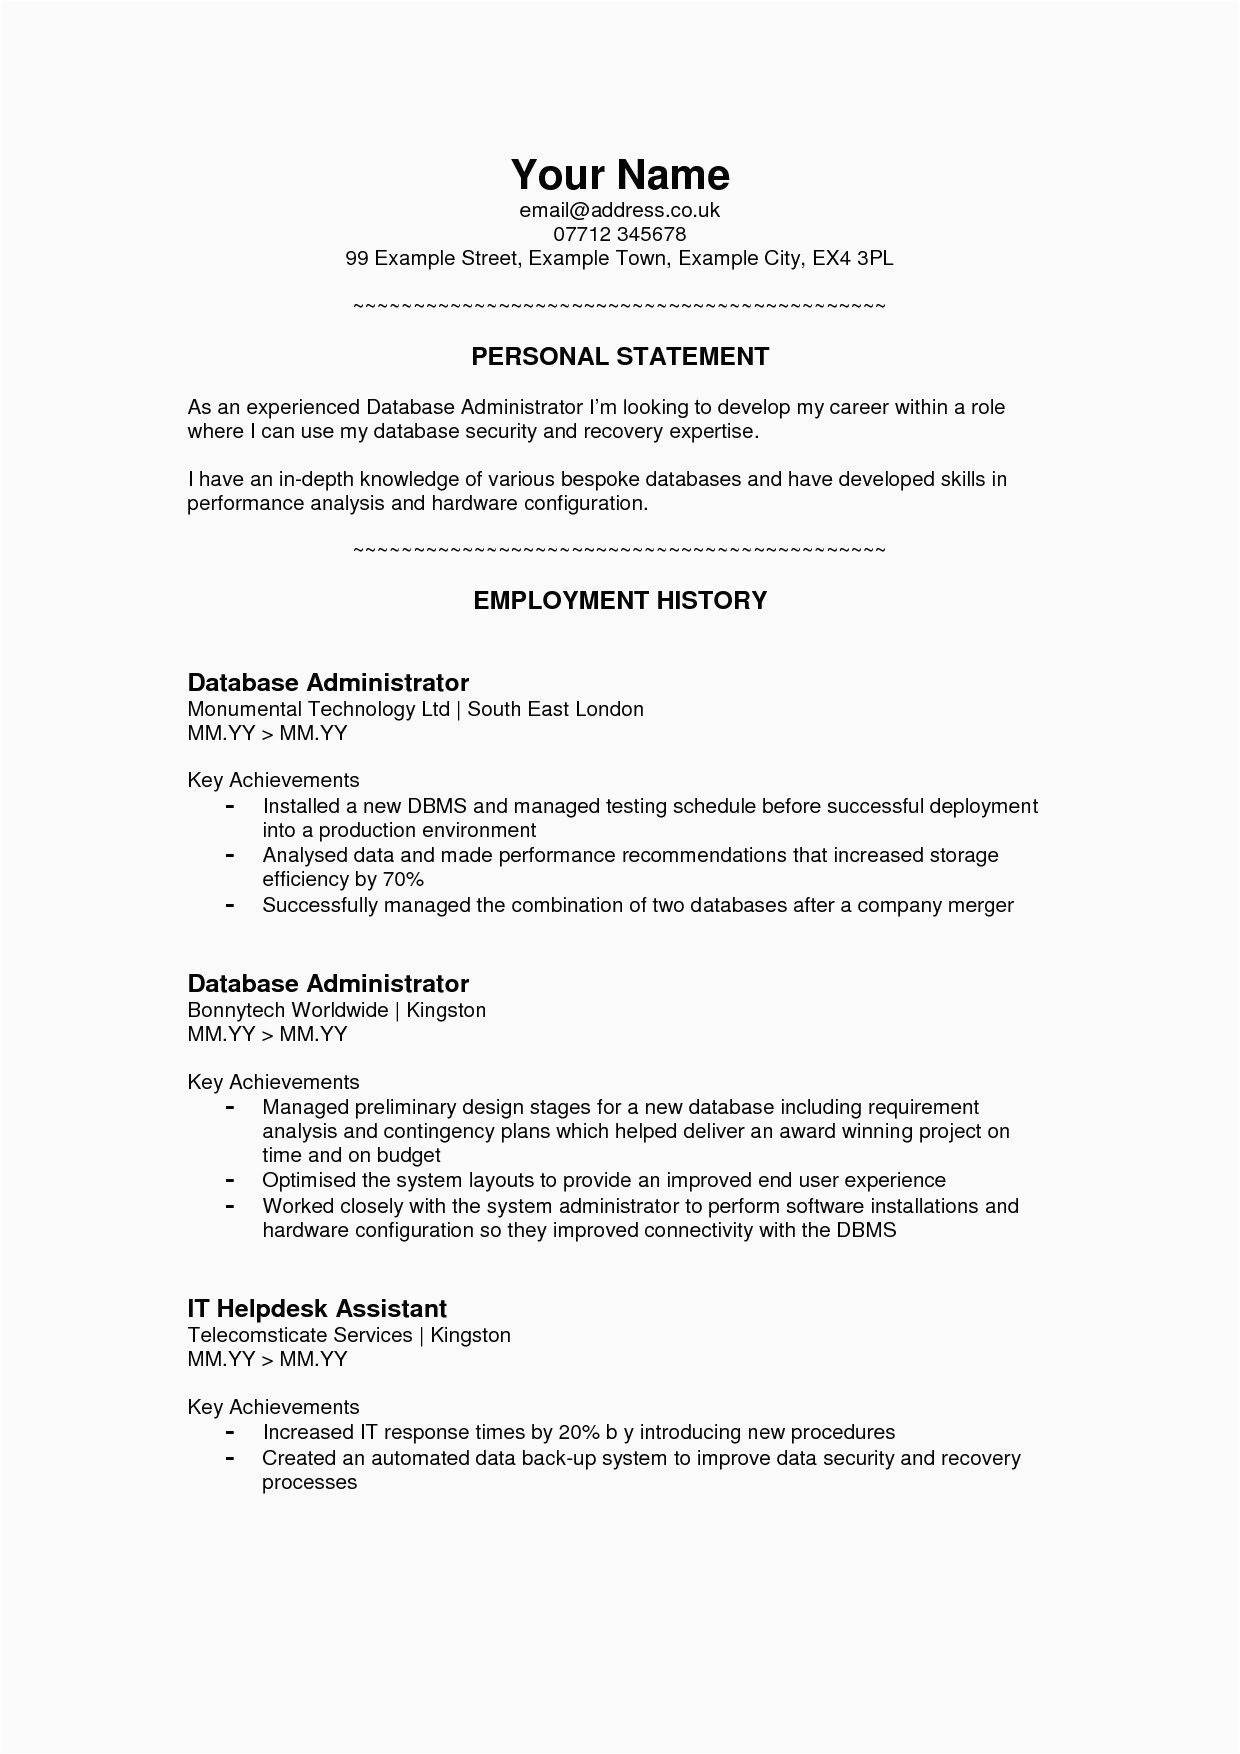 Sample Resume with A Personal Statement Personal Brand Statement Examples